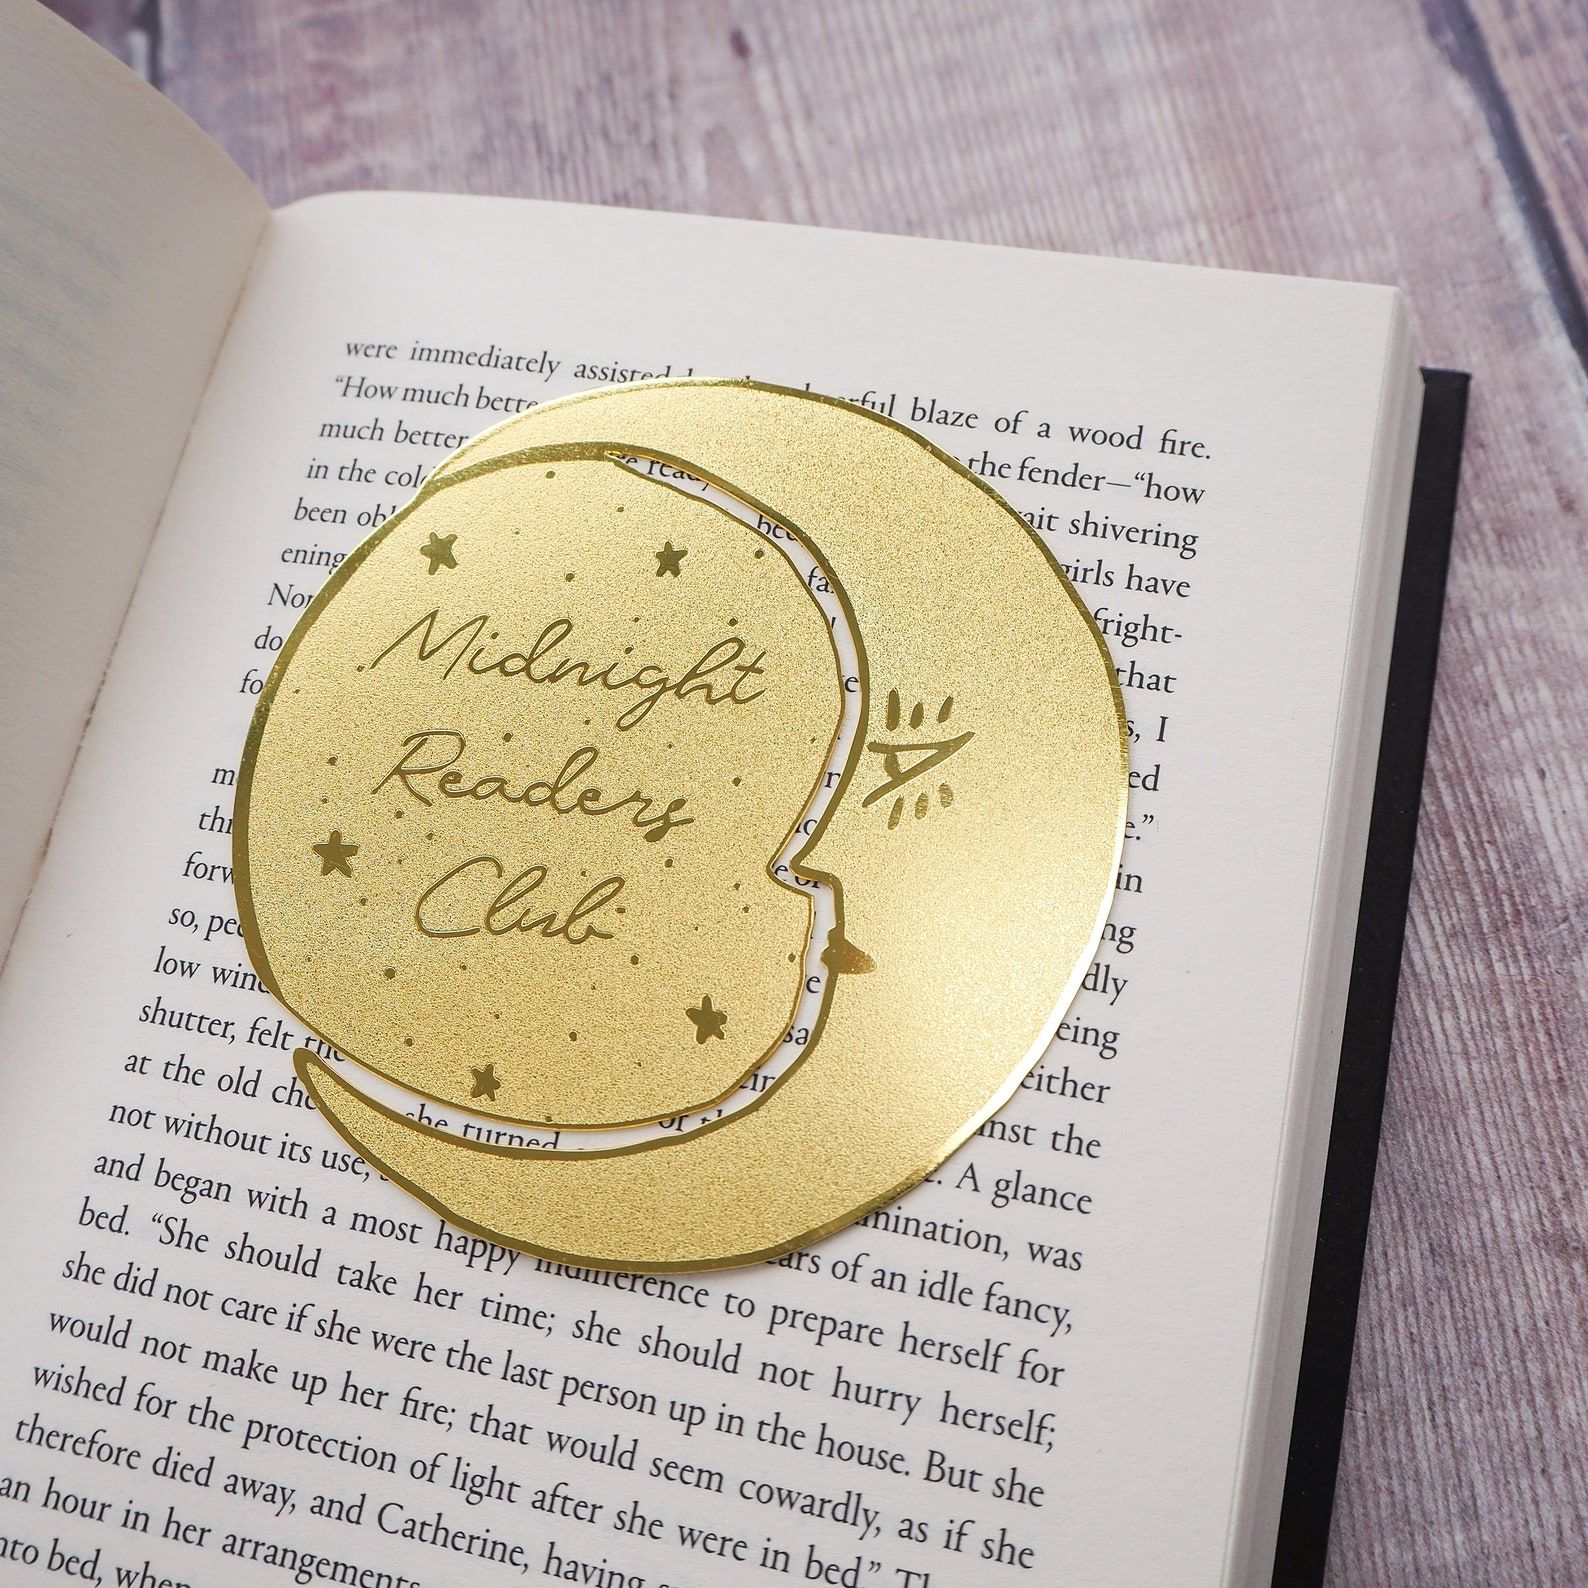 Image of a round metal moon bookmark, which reads "Midnight readers club."  